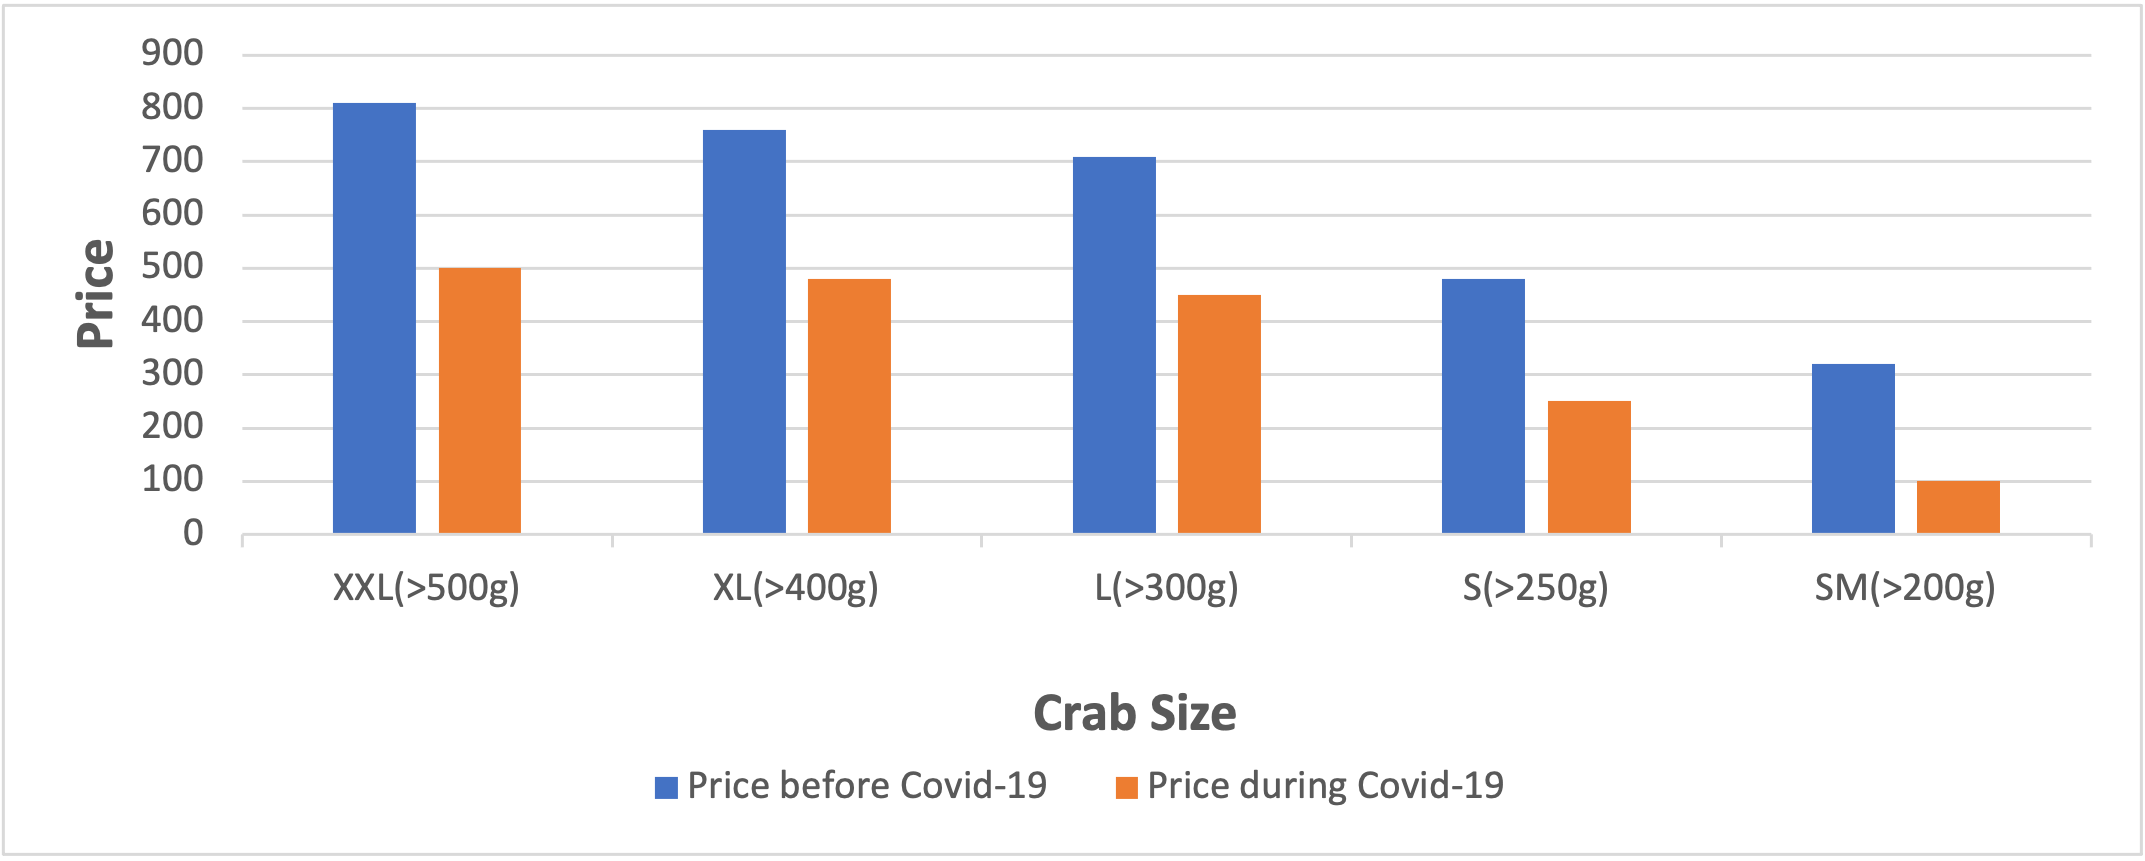 This chart shows the effect of Covid-19 on price of crab in relation to crab size.